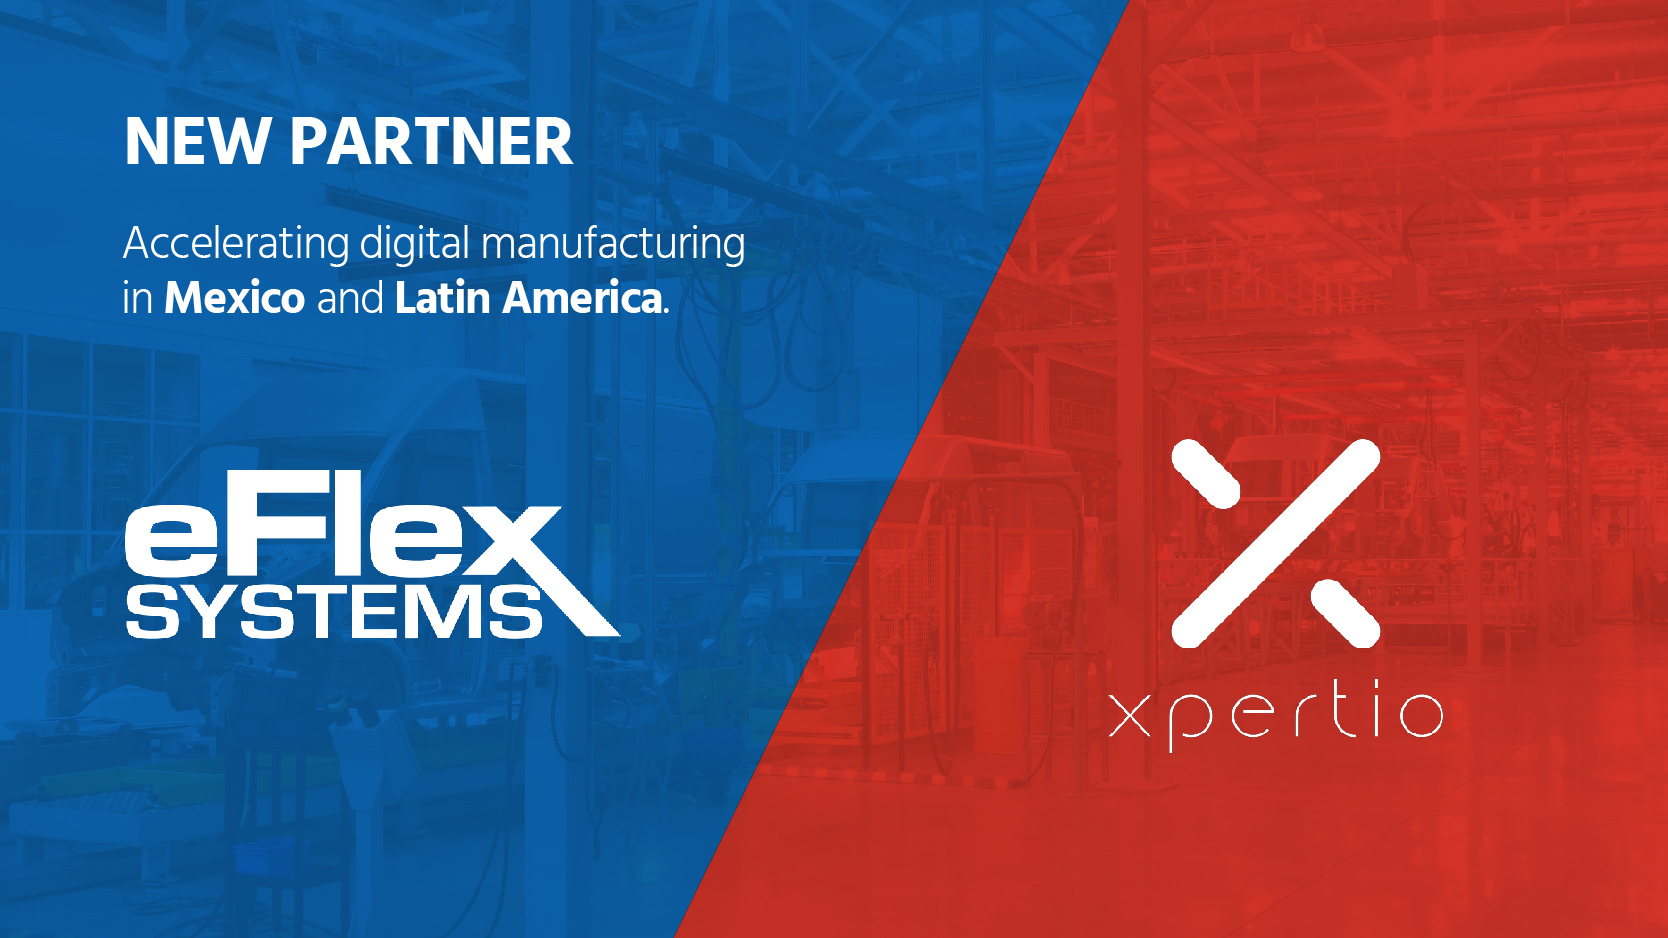 eFlex Partners with XPERTIO to Expand Digital Manufacturing in Mexico and Latin America